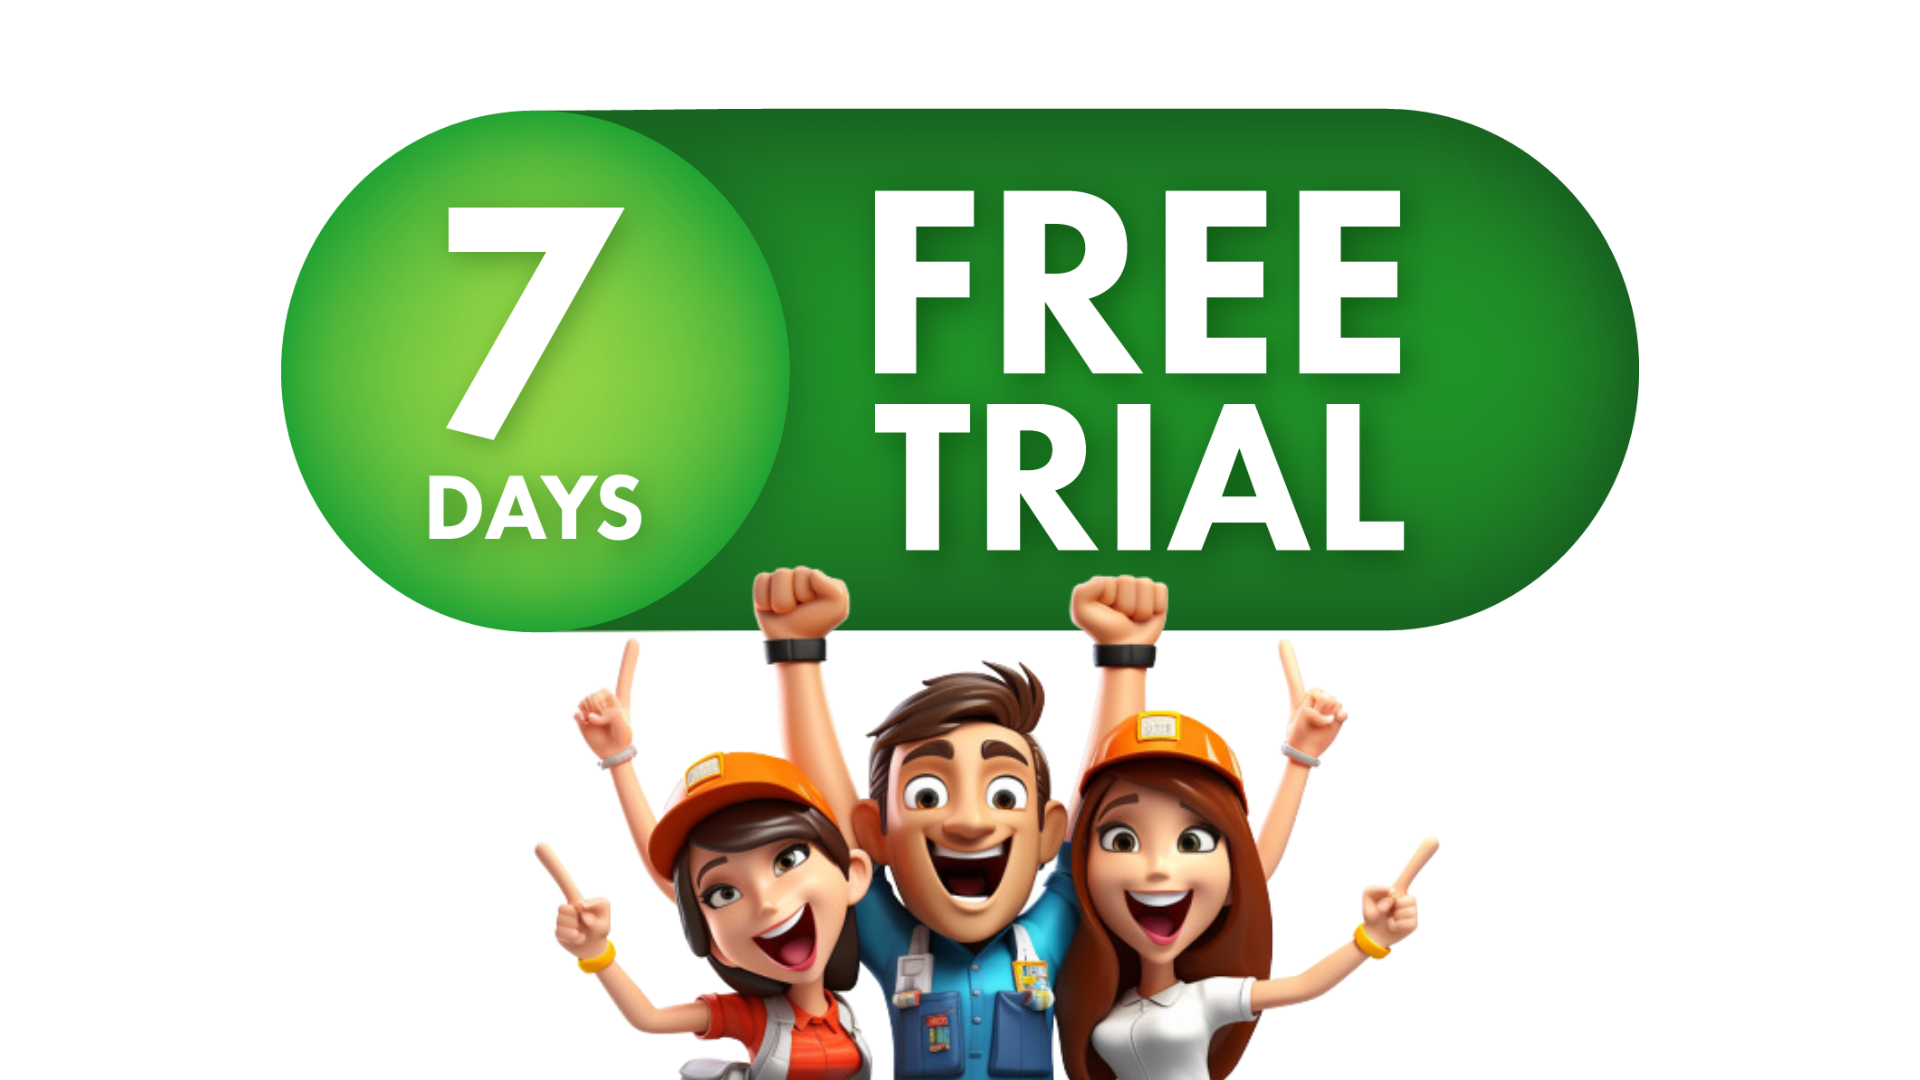 7 DAY FREE TRIAL